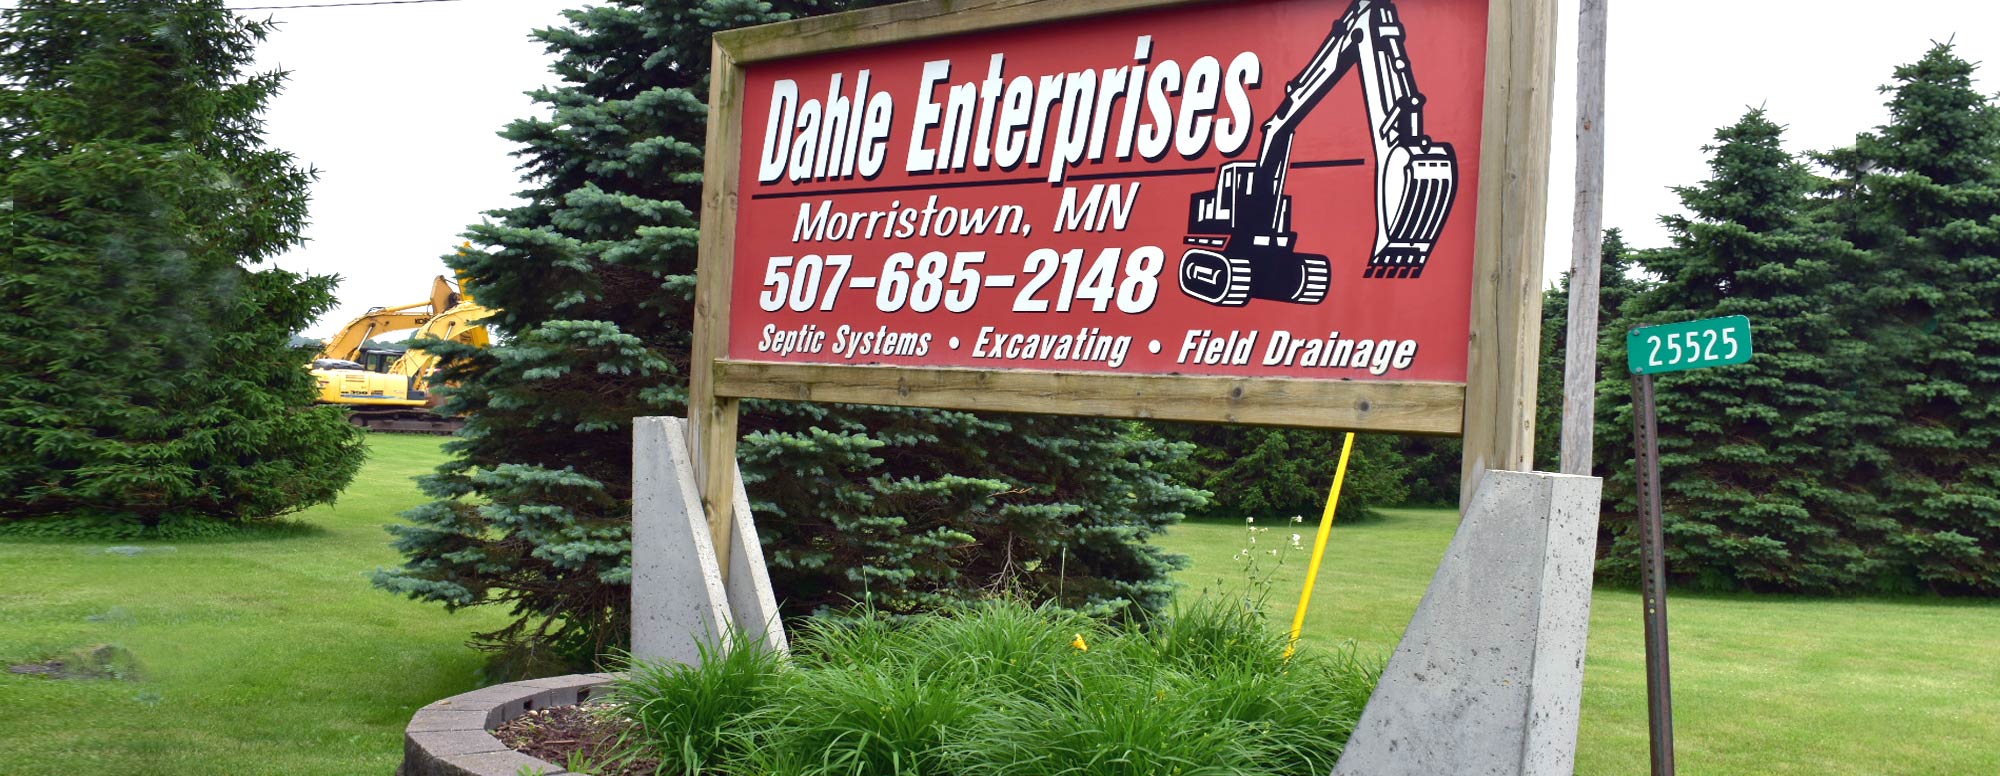 Dahle Enterprises' business welcome sign outside their facility location in Morristown, MN